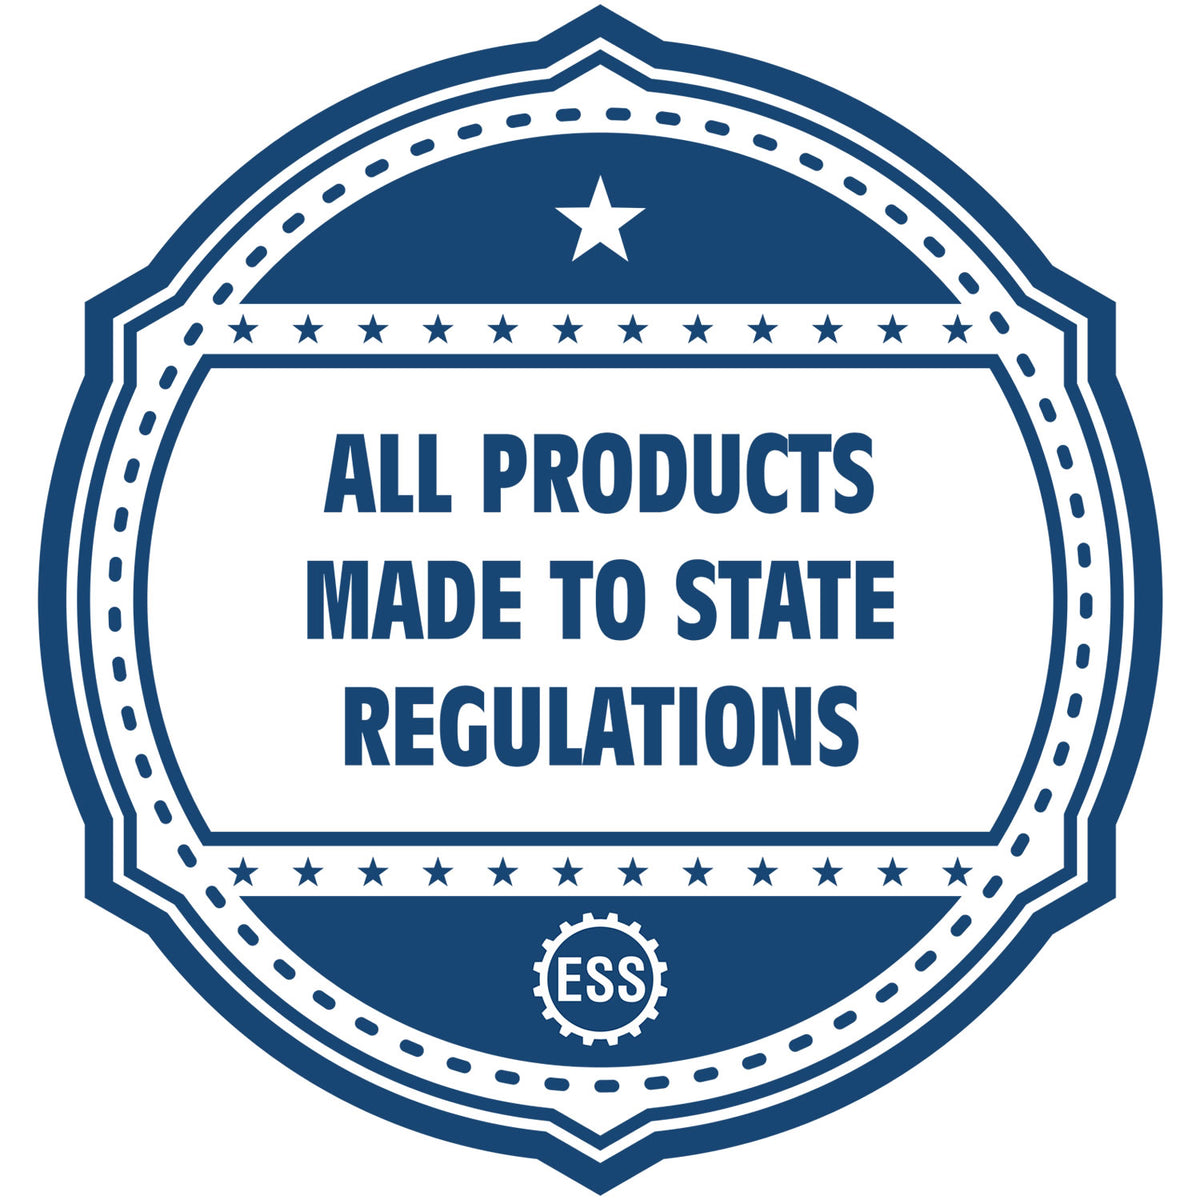 An icon or badge element for the West Virginia Desk Architect Embossing Seal showing that this product is made in compliance with state regulations.